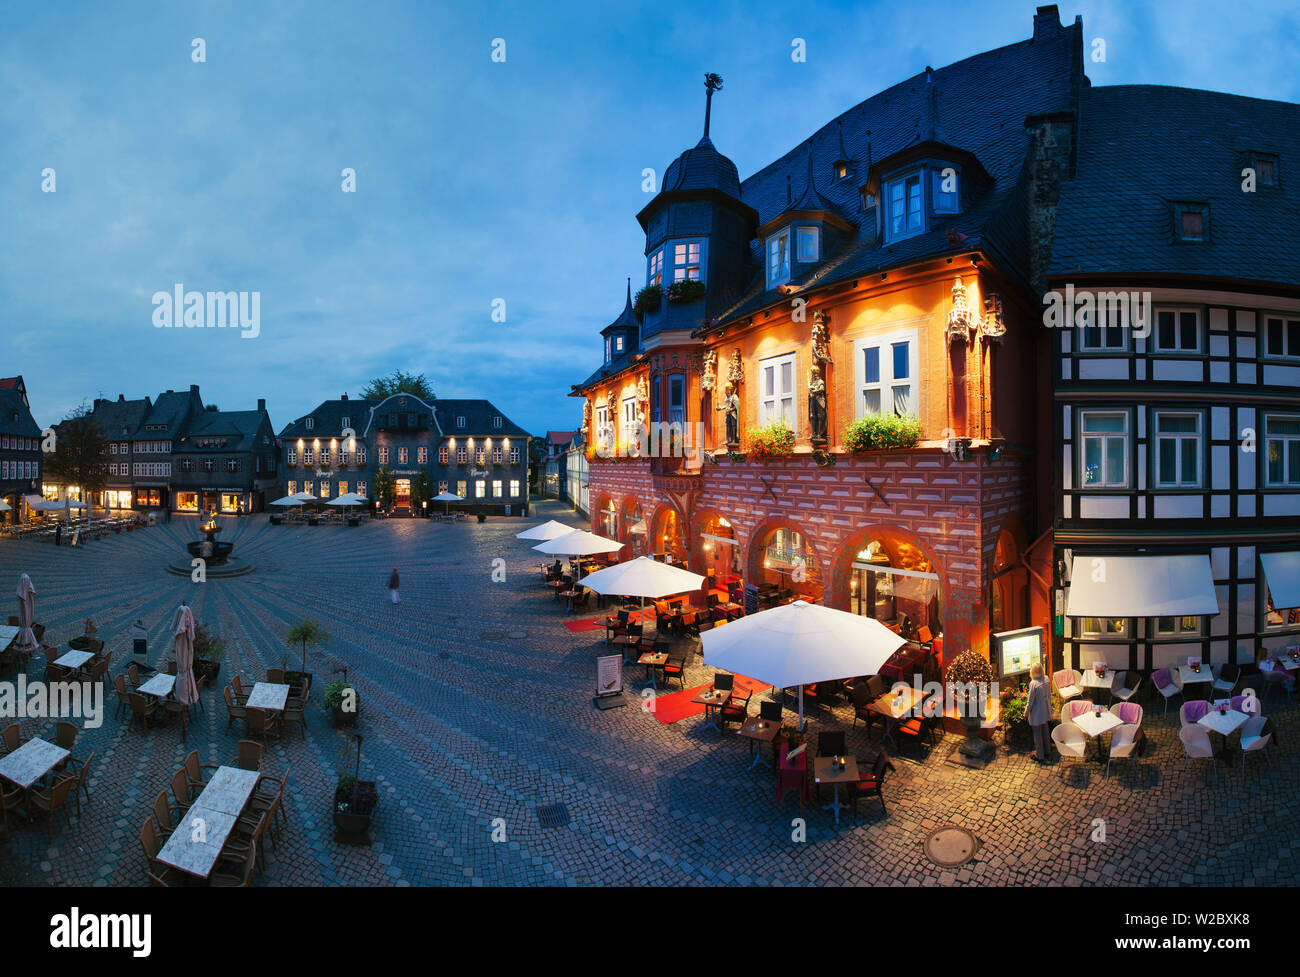 Markt Square, old town, Wernigerode, Harz Mountains,  Saxony-Anhalt, Germany Stock Photo